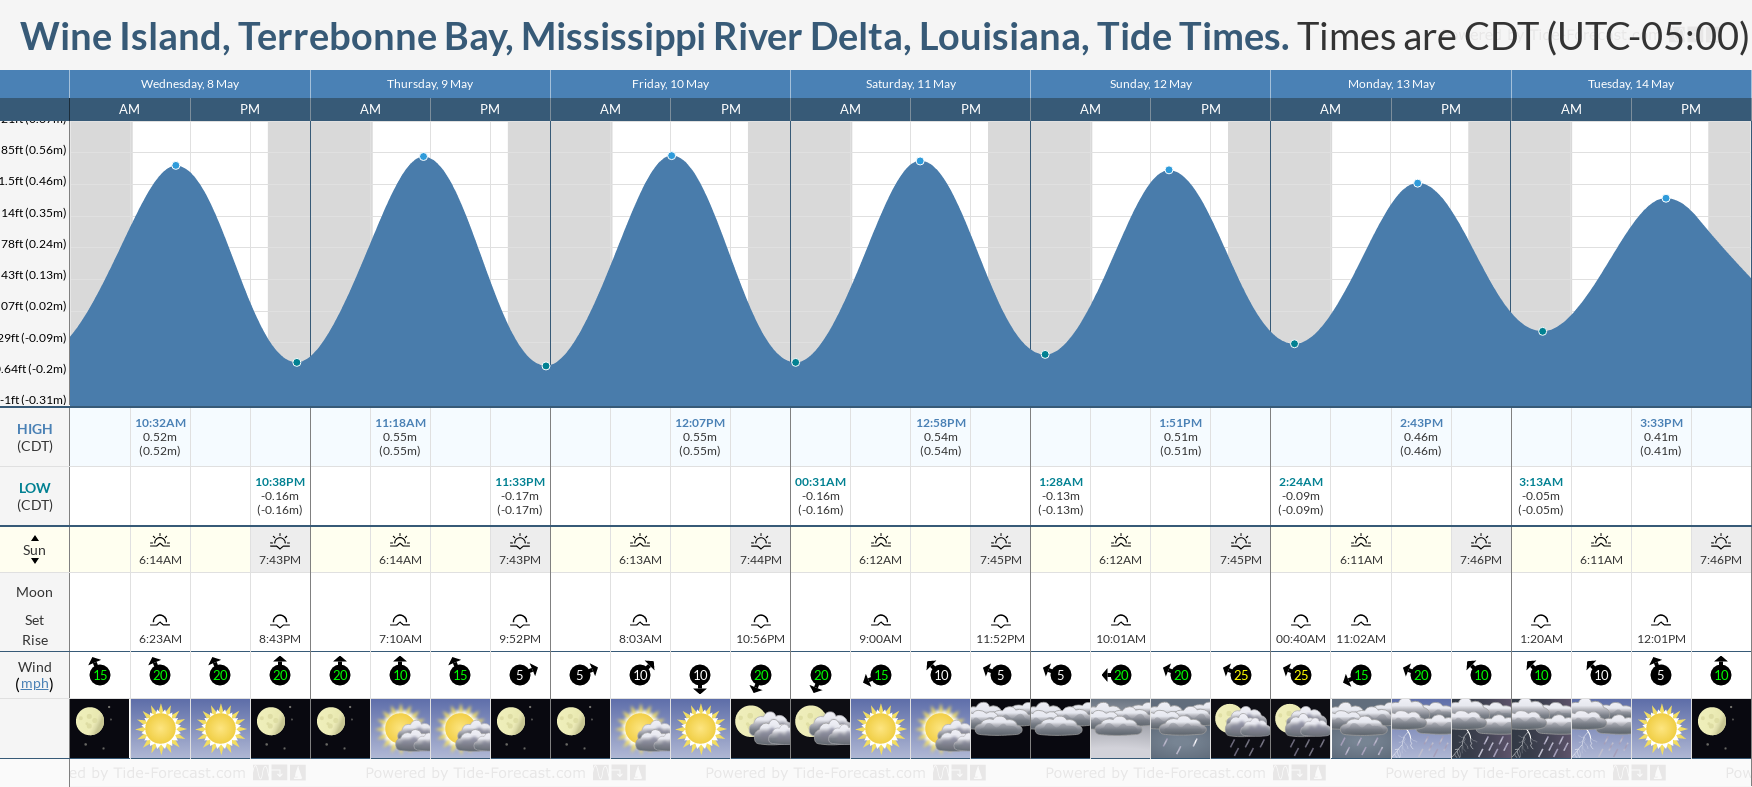 Wine Island, Terrebonne Bay, Mississippi River Delta, Louisiana Tide Chart including high and low tide tide times for the next 7 days